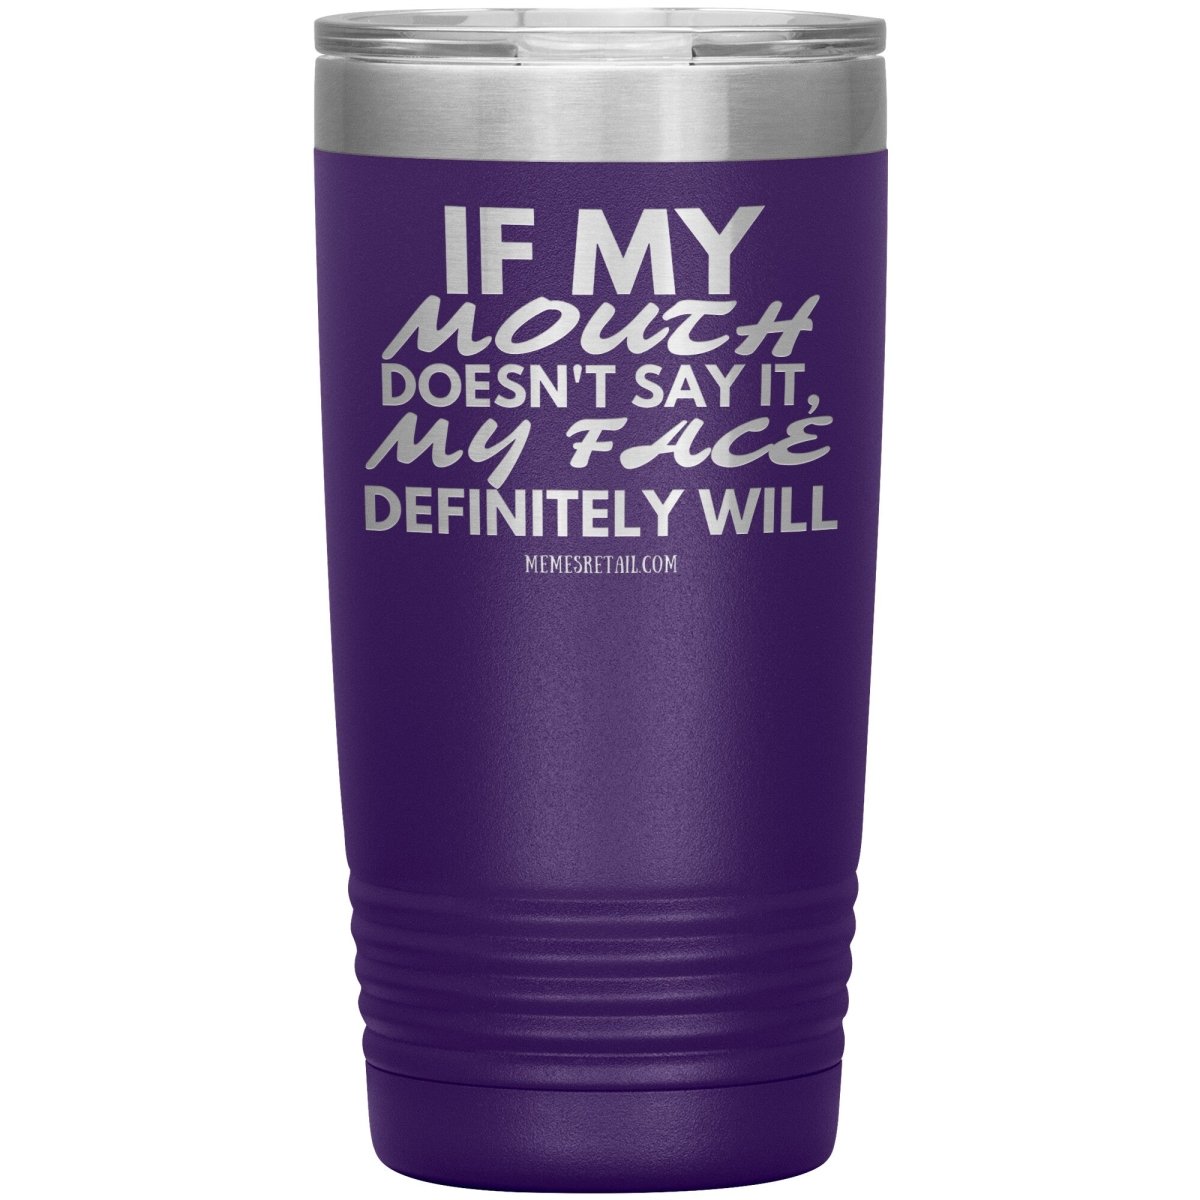 If my mouth doesn't say it, my face definitely will Tumblers, 20oz Insulated Tumbler / Purple - MemesRetail.com